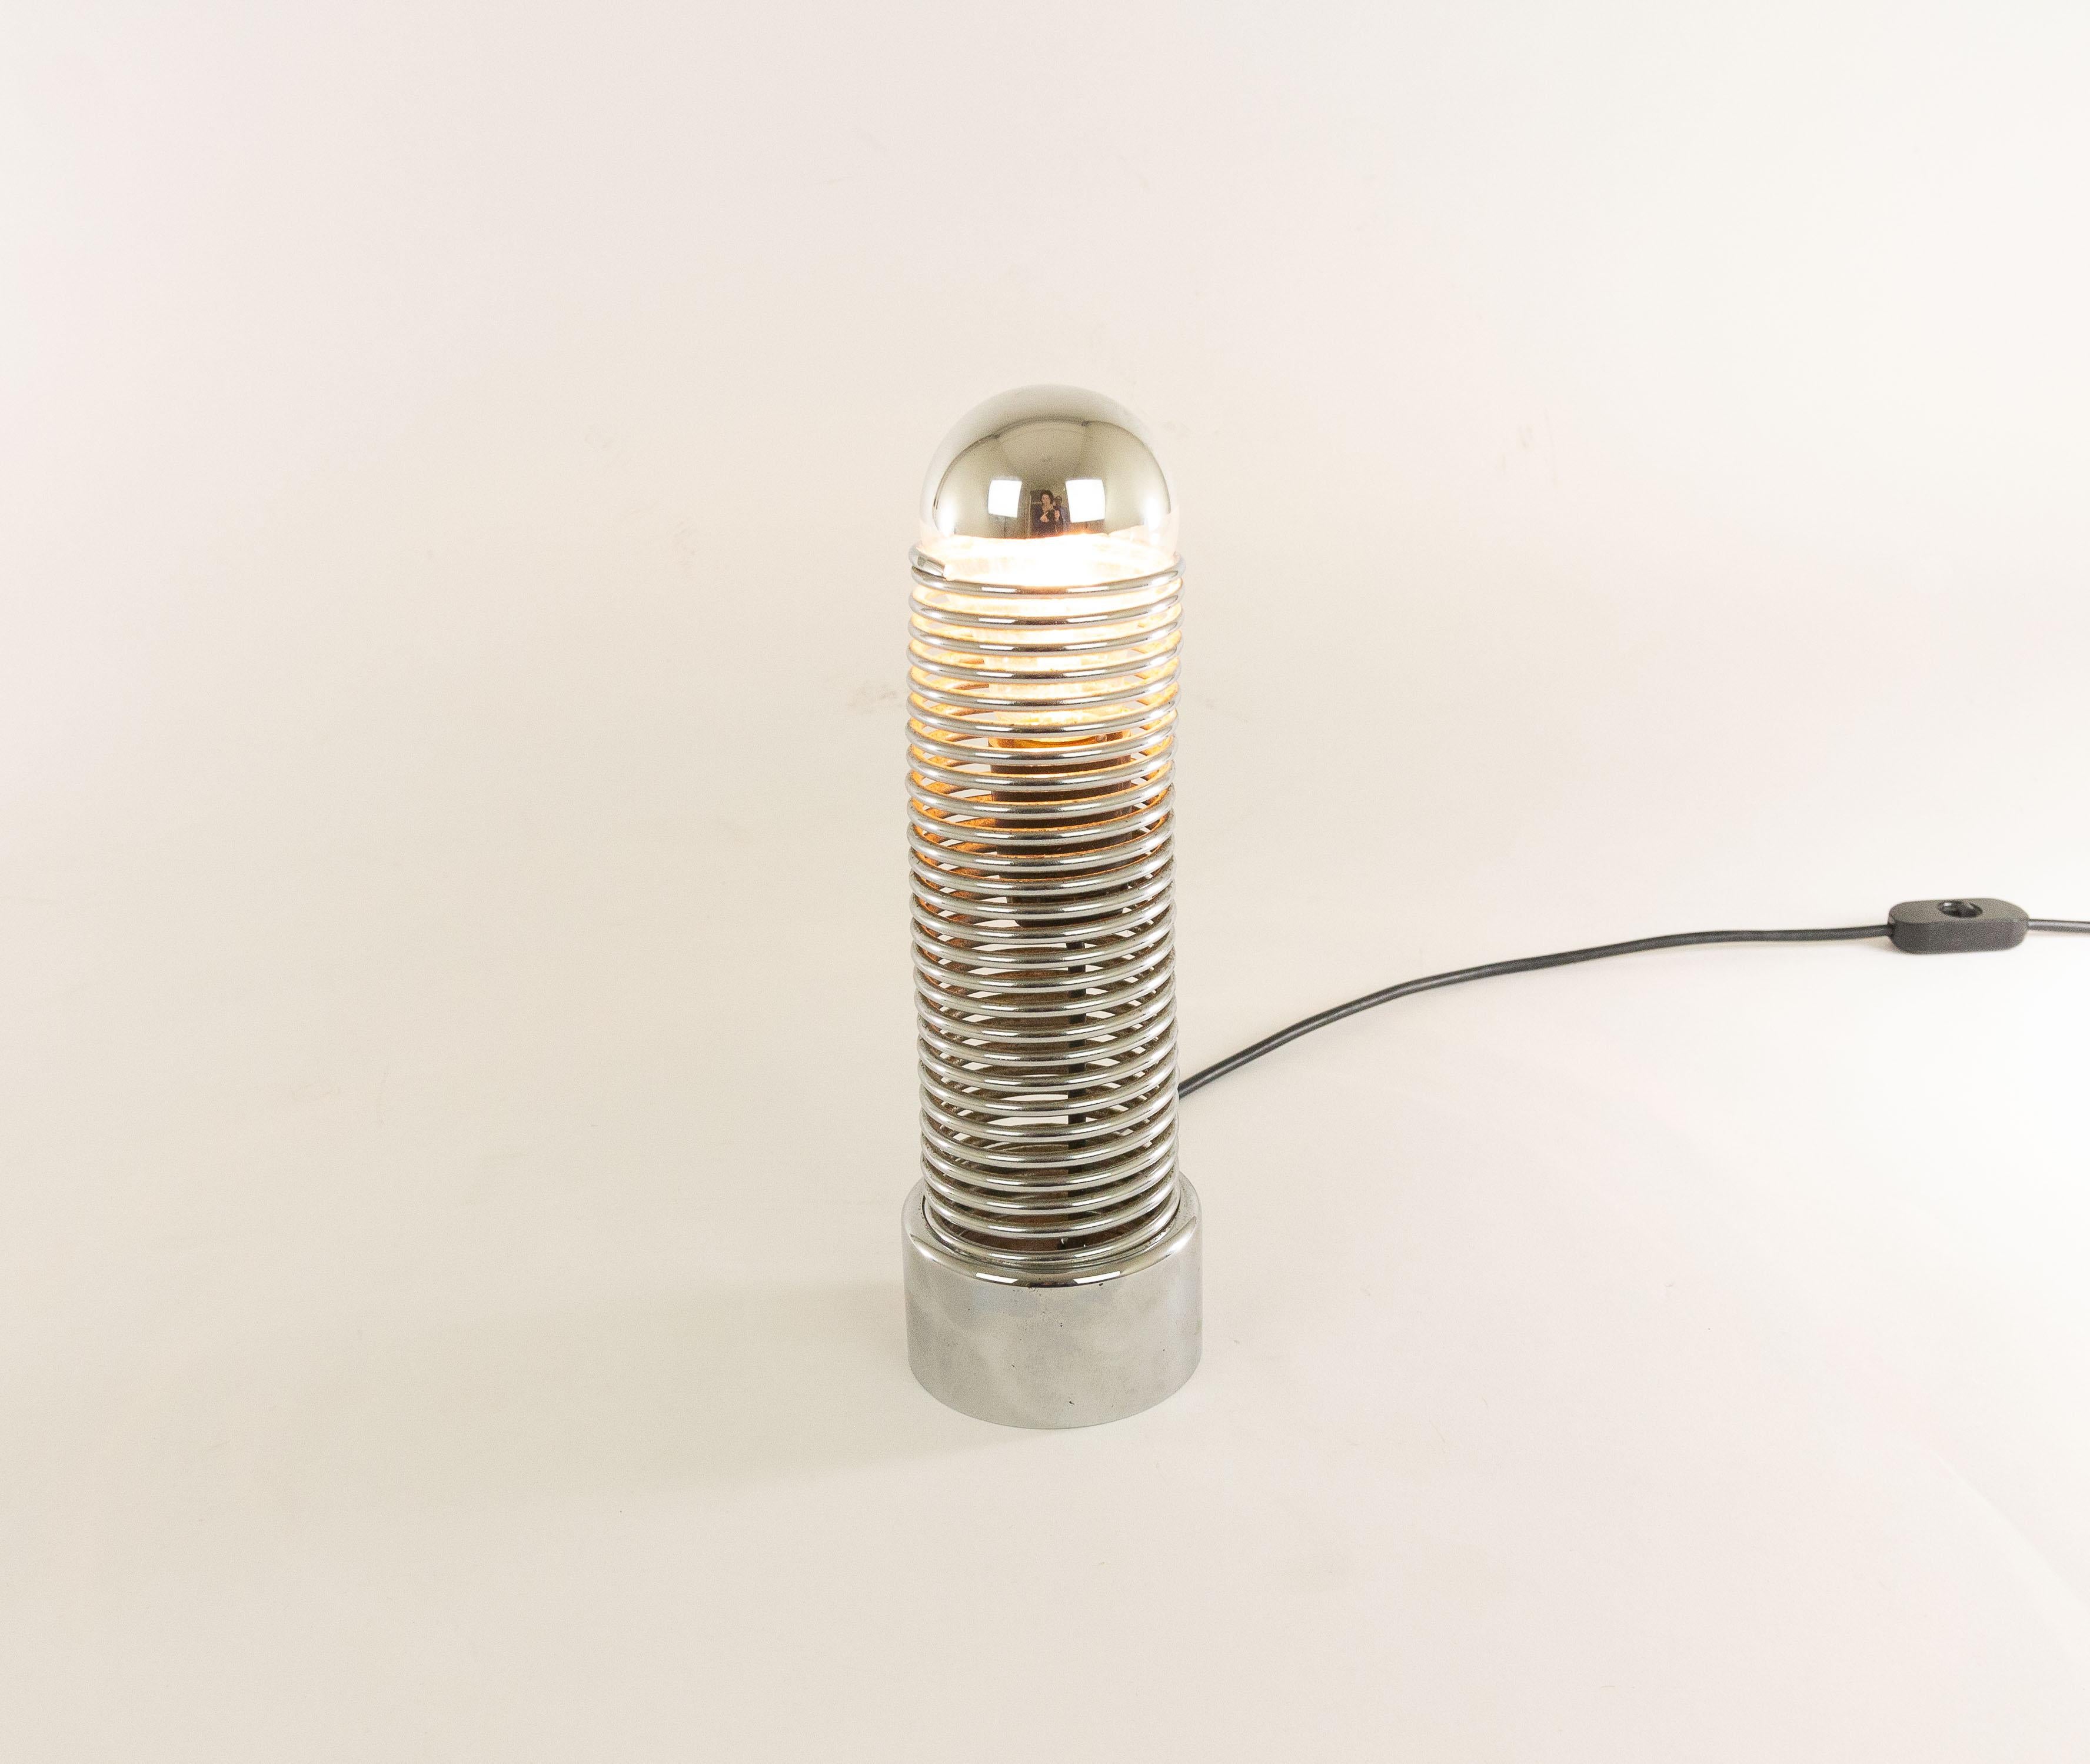 Jo-Jo table lamp designed by Heinz Brenker and produced by Harvey Guzzini, 1971. The lamp was in production from 1972-1974.

The lamp is made entirely of chrome-plated metal. The heavy base provides a counterbalance to the movable coil or spring